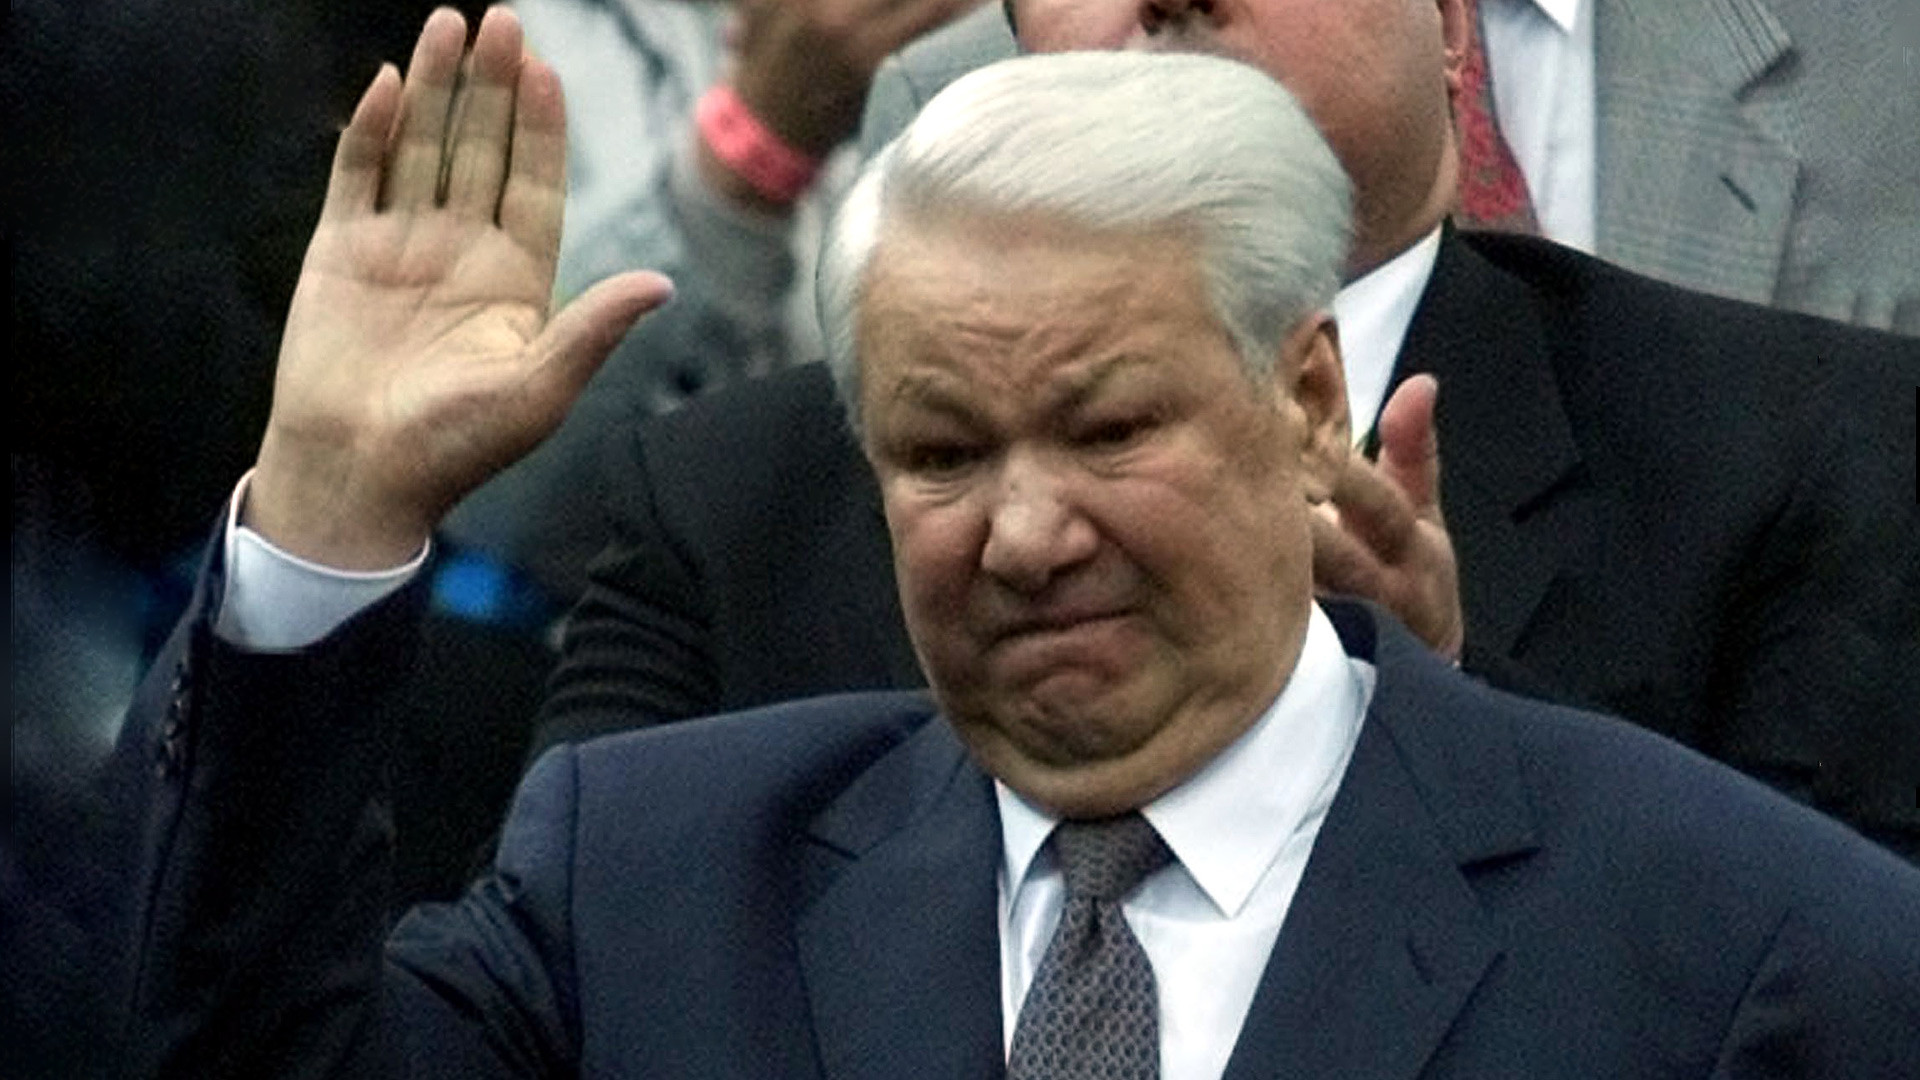 How Russian Parliament tried to impeach President Yeltsin - Russia Beyond1920 x 1080